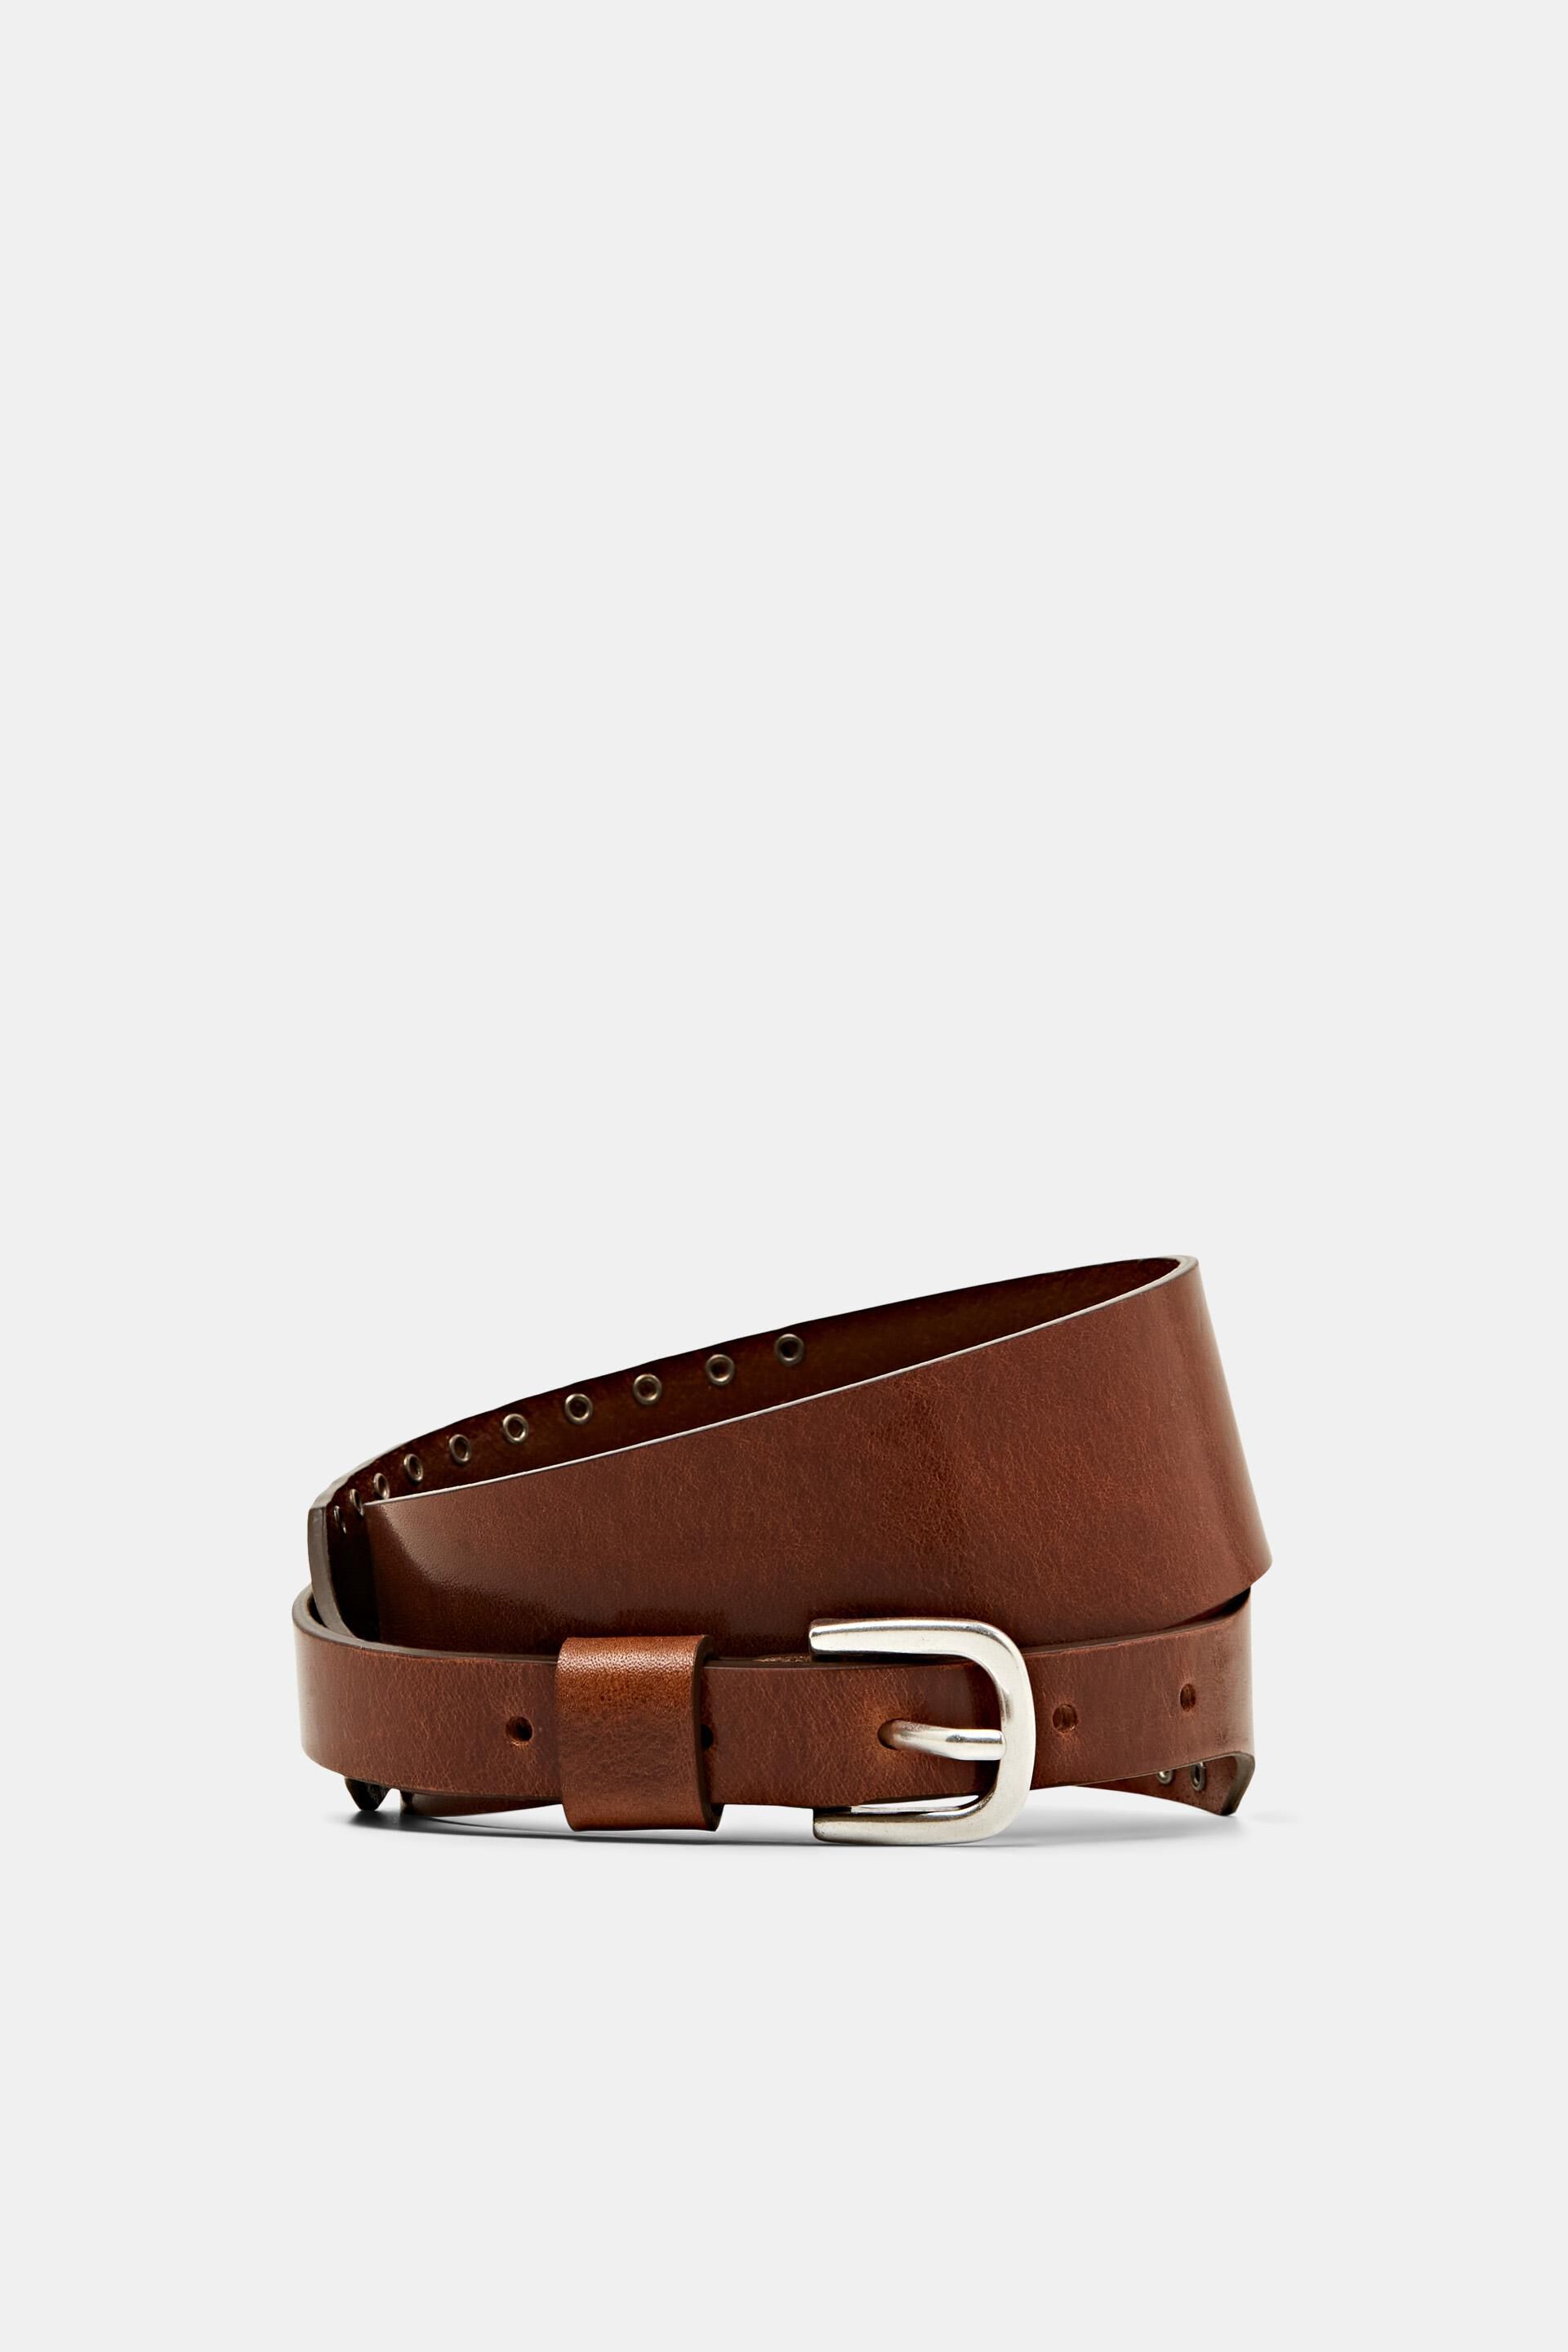 Esprit Waist belt 100% real leather with studs,